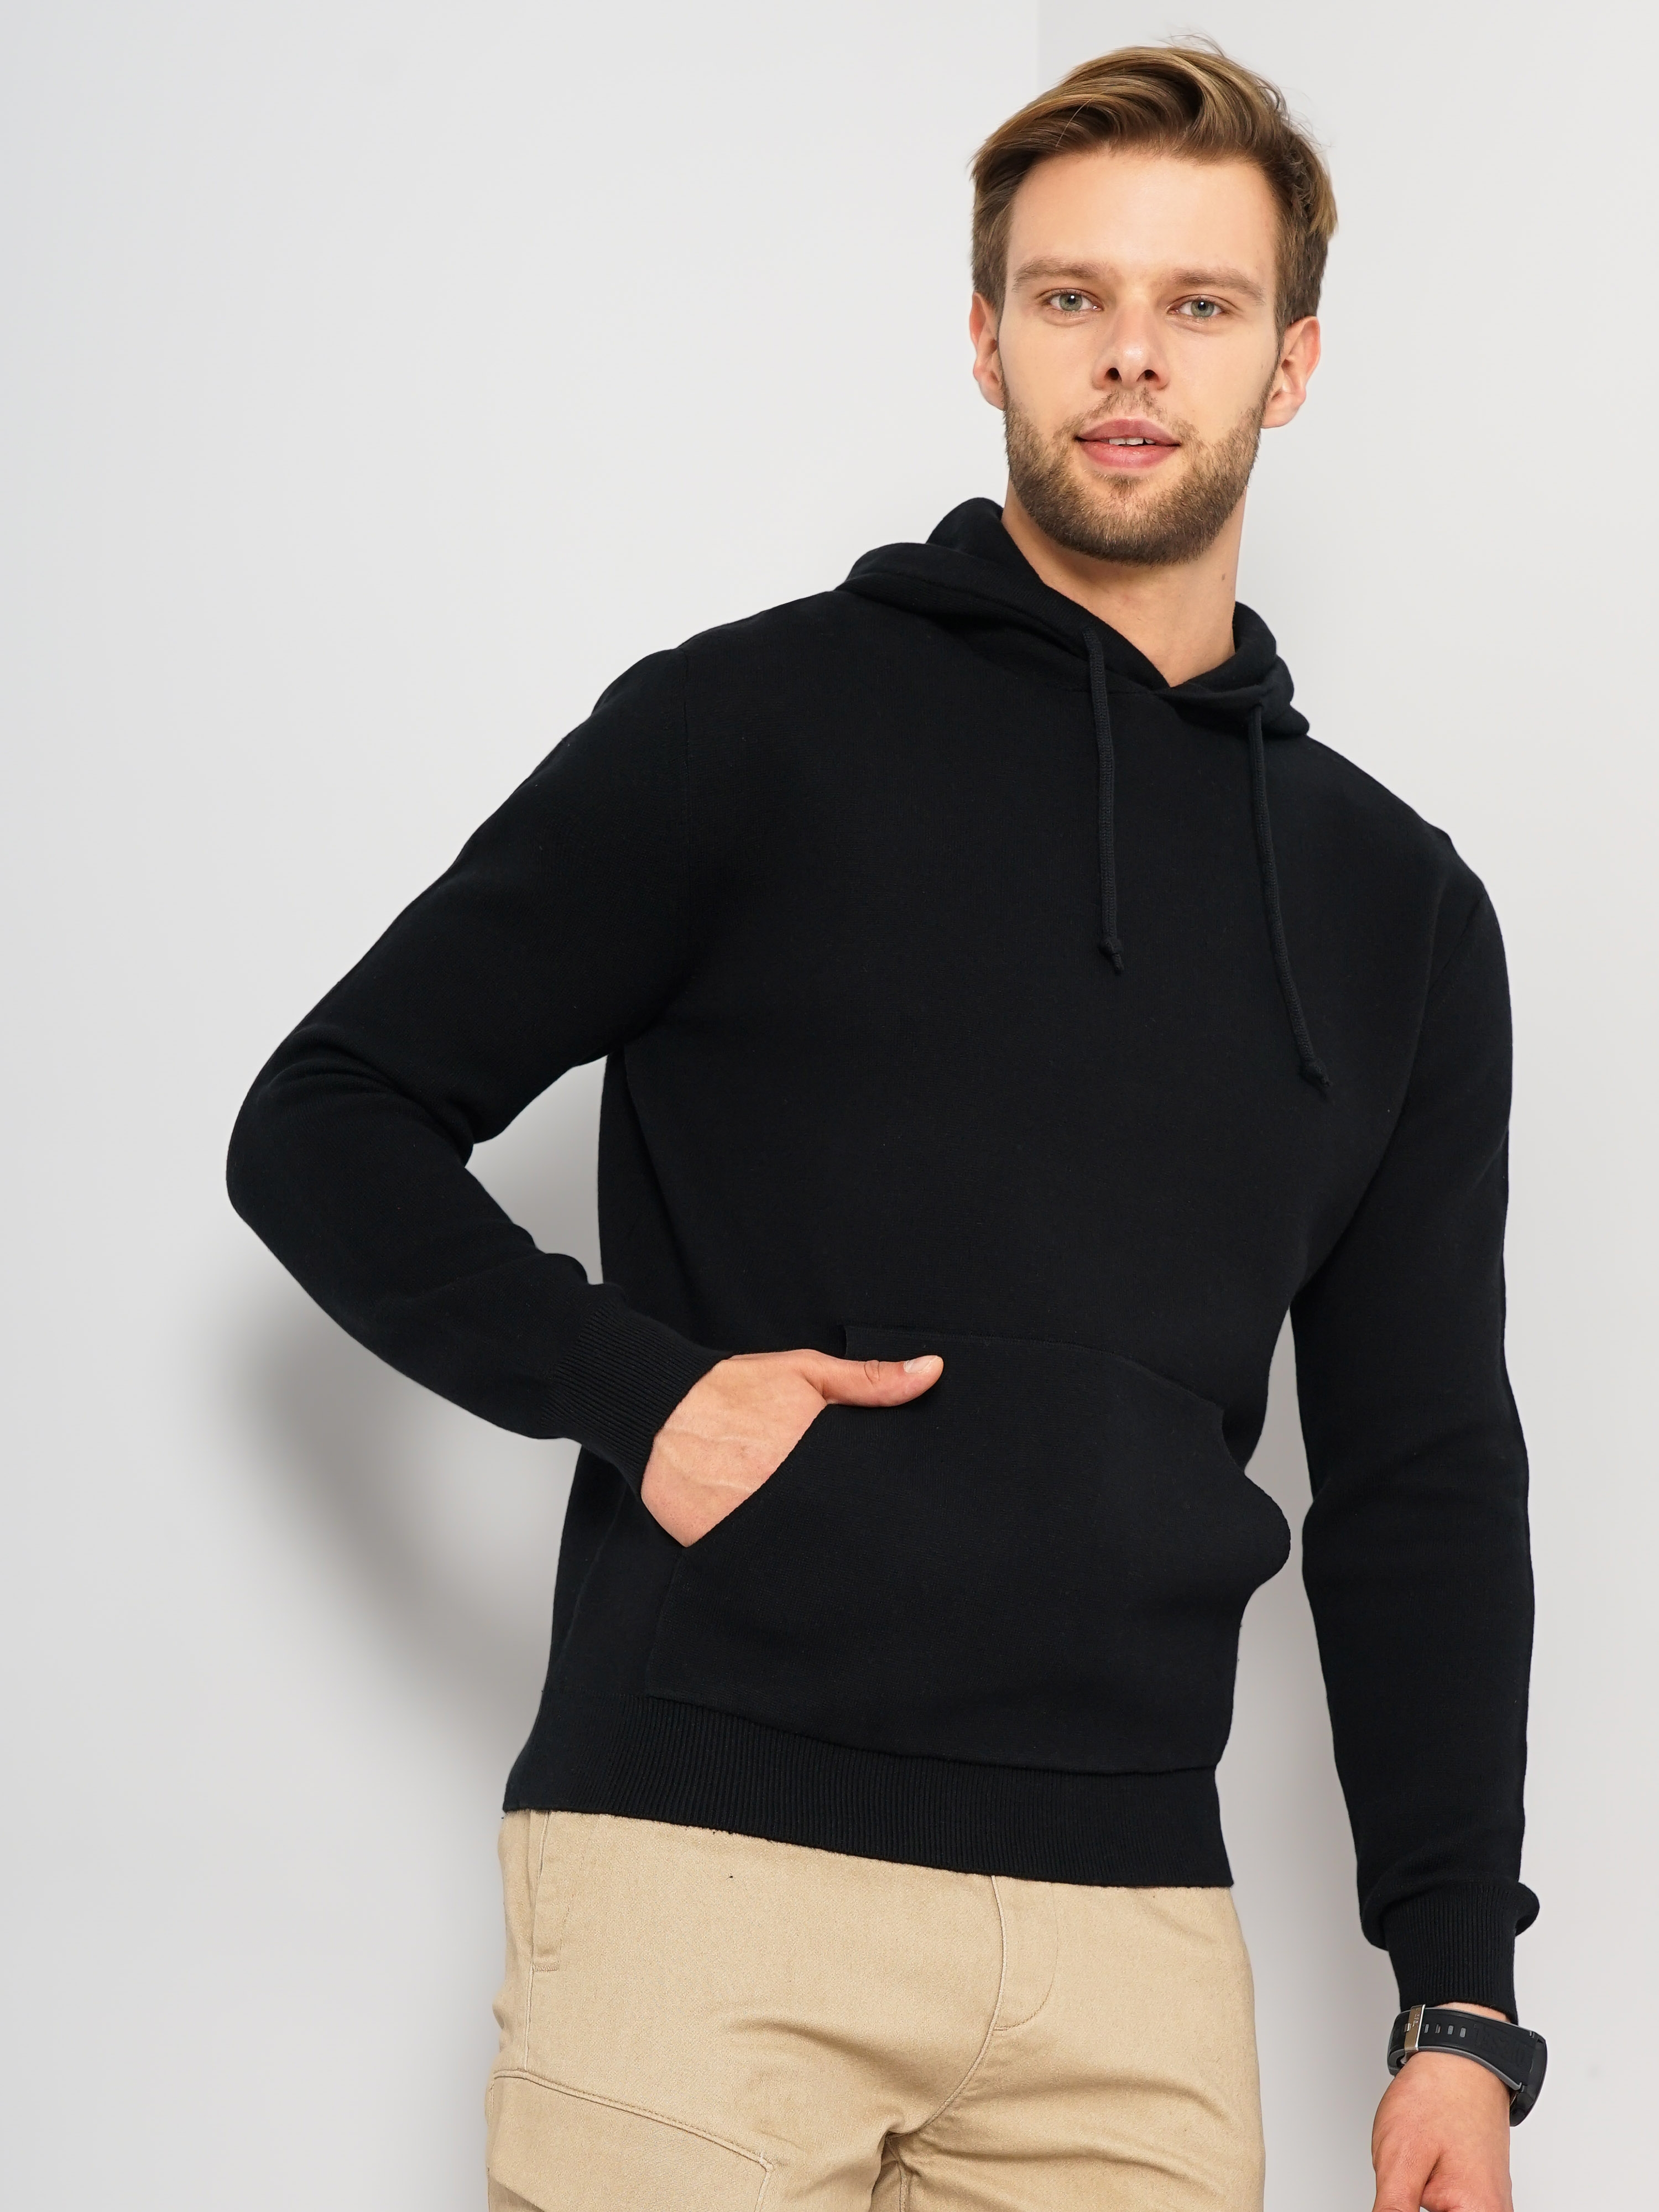 Men's Black Knitted Sweaters